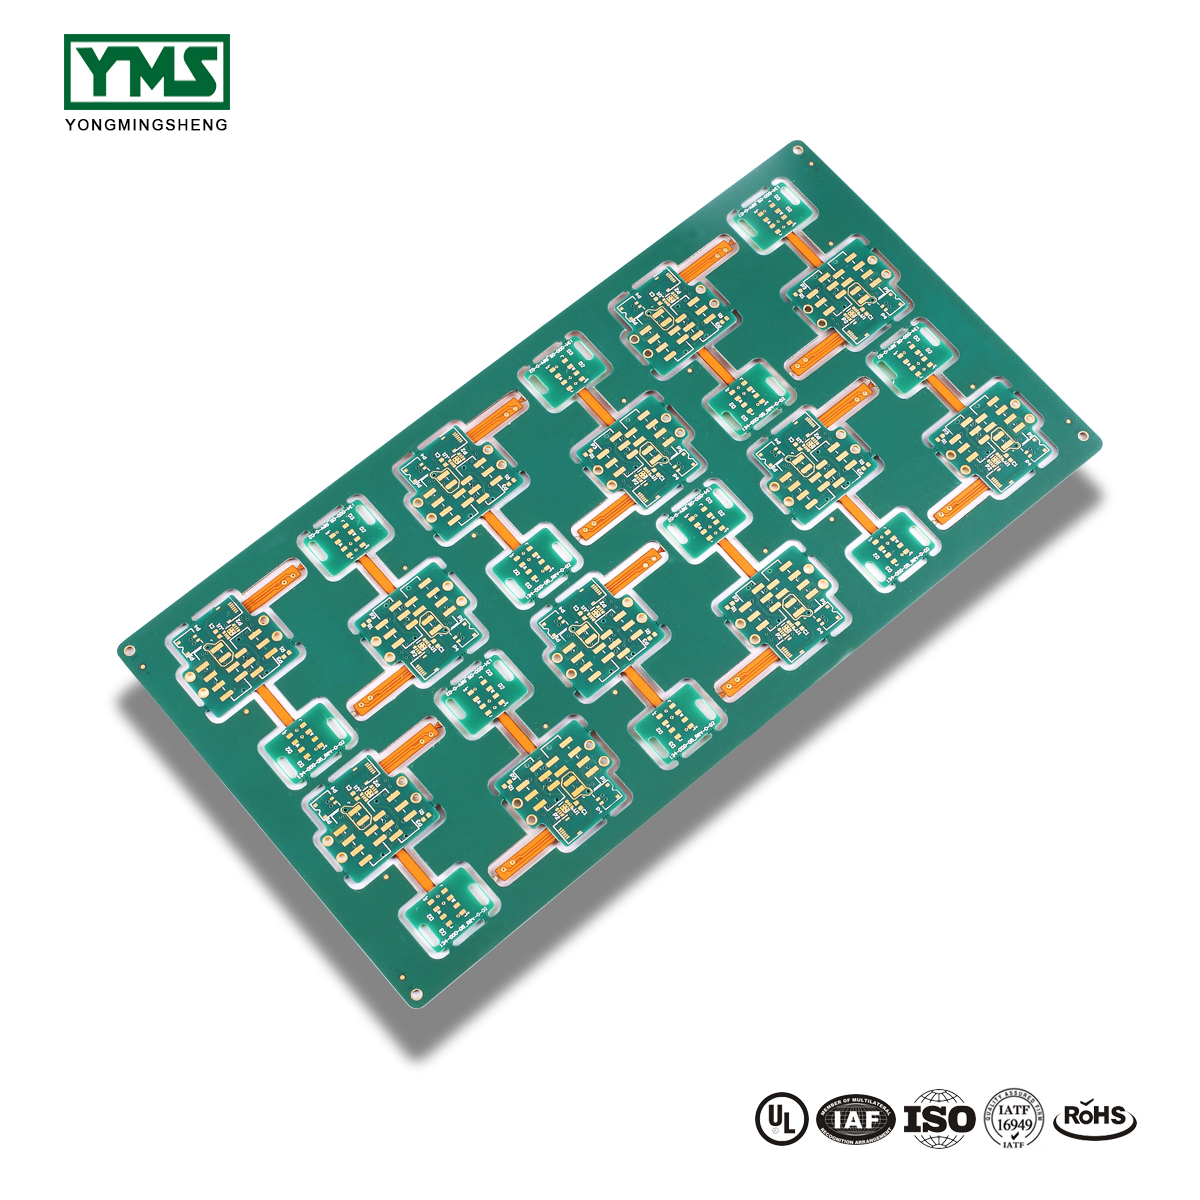 Special Price for Copper-Aluminum Composite Pcb - HDI Flex-Rigid Board | YMS PCB – Yongmingsheng